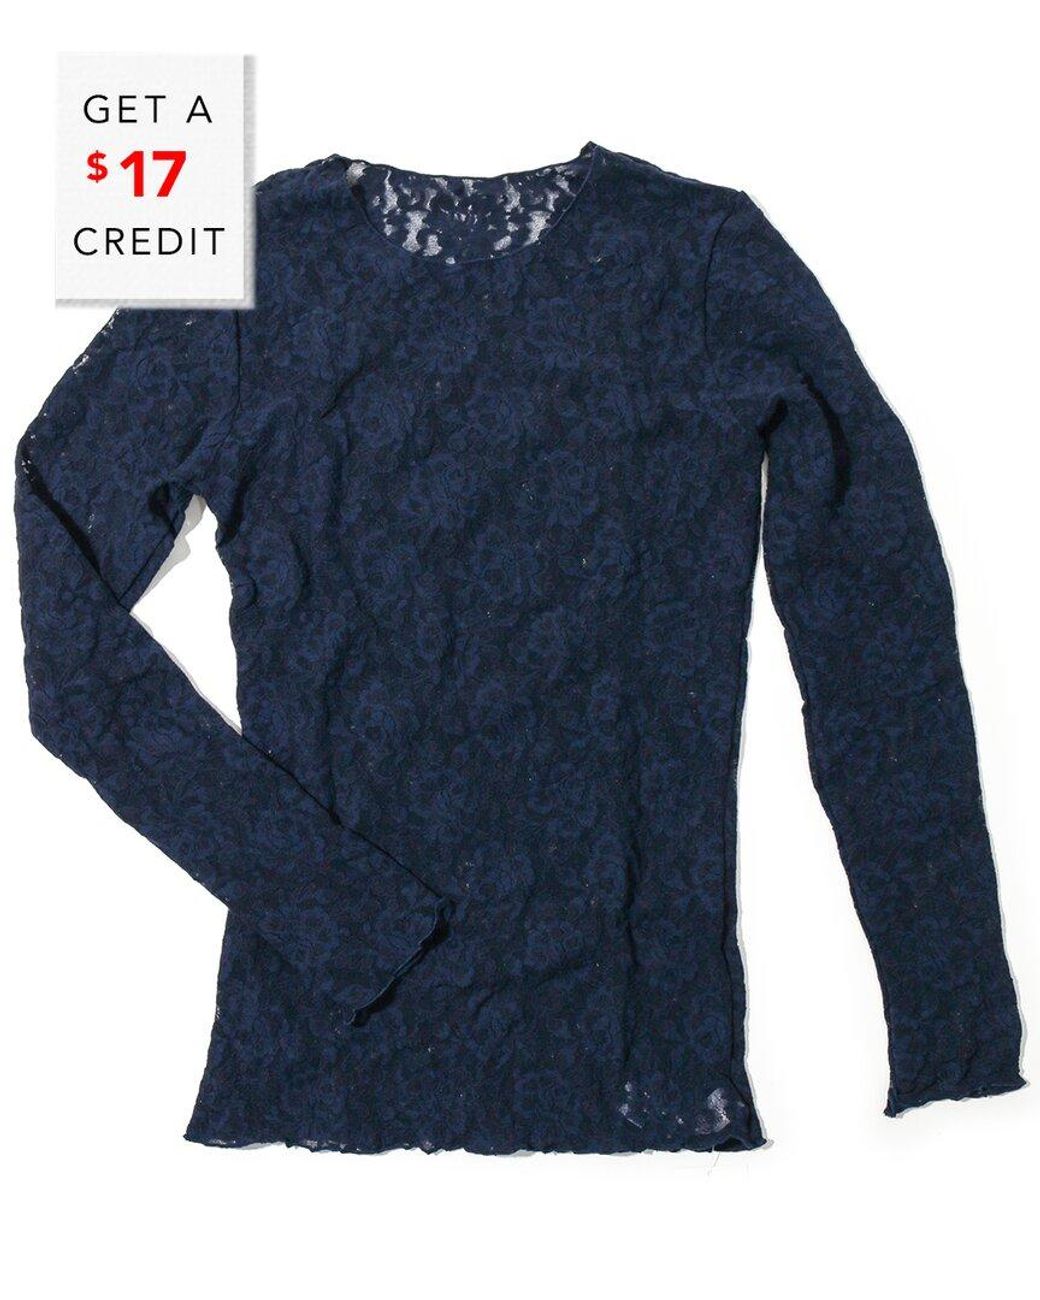 Hanky Panky Signatue Lace Long Sleeve Top With $17 Credit in Blue